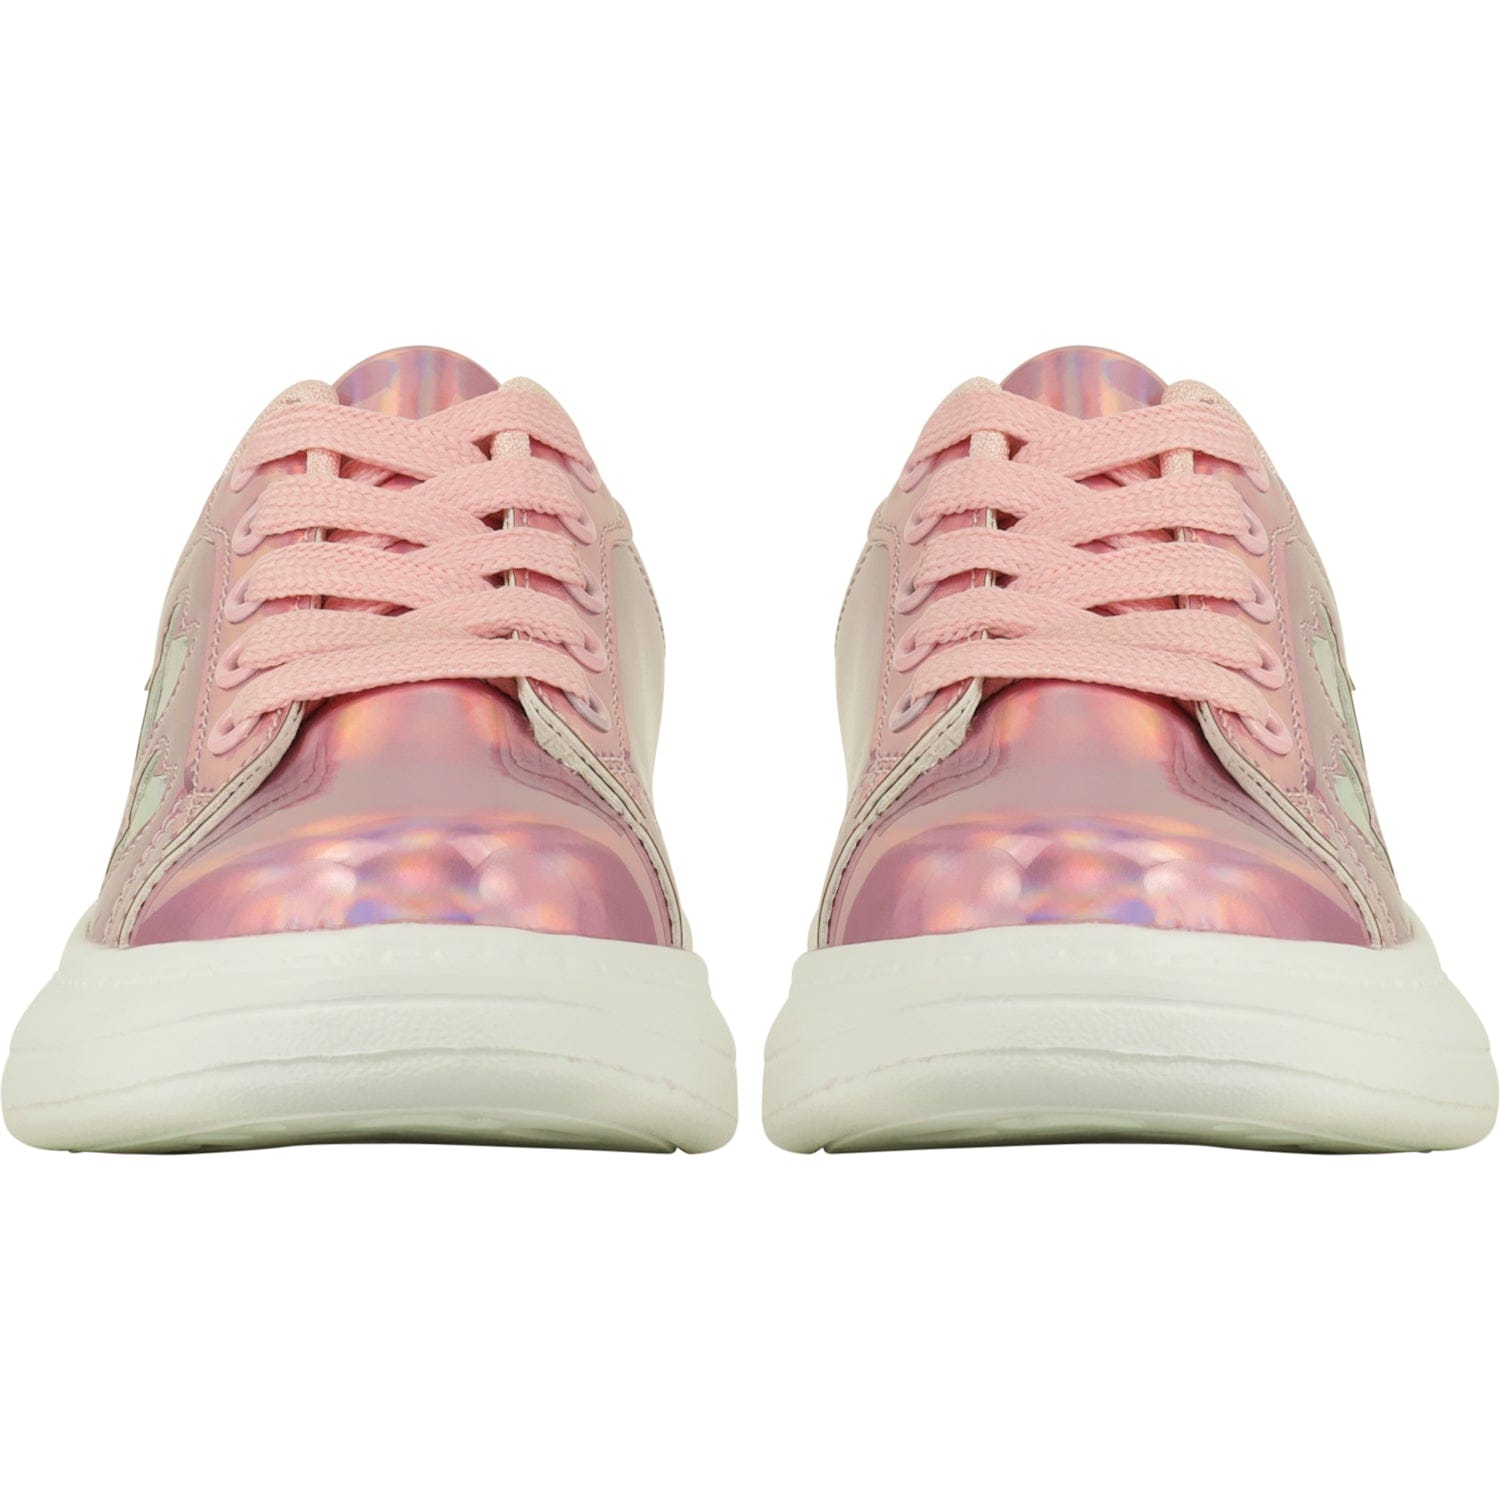 A DEE -  Peony Dream Queeny Chunky Heart Trainers - Pink